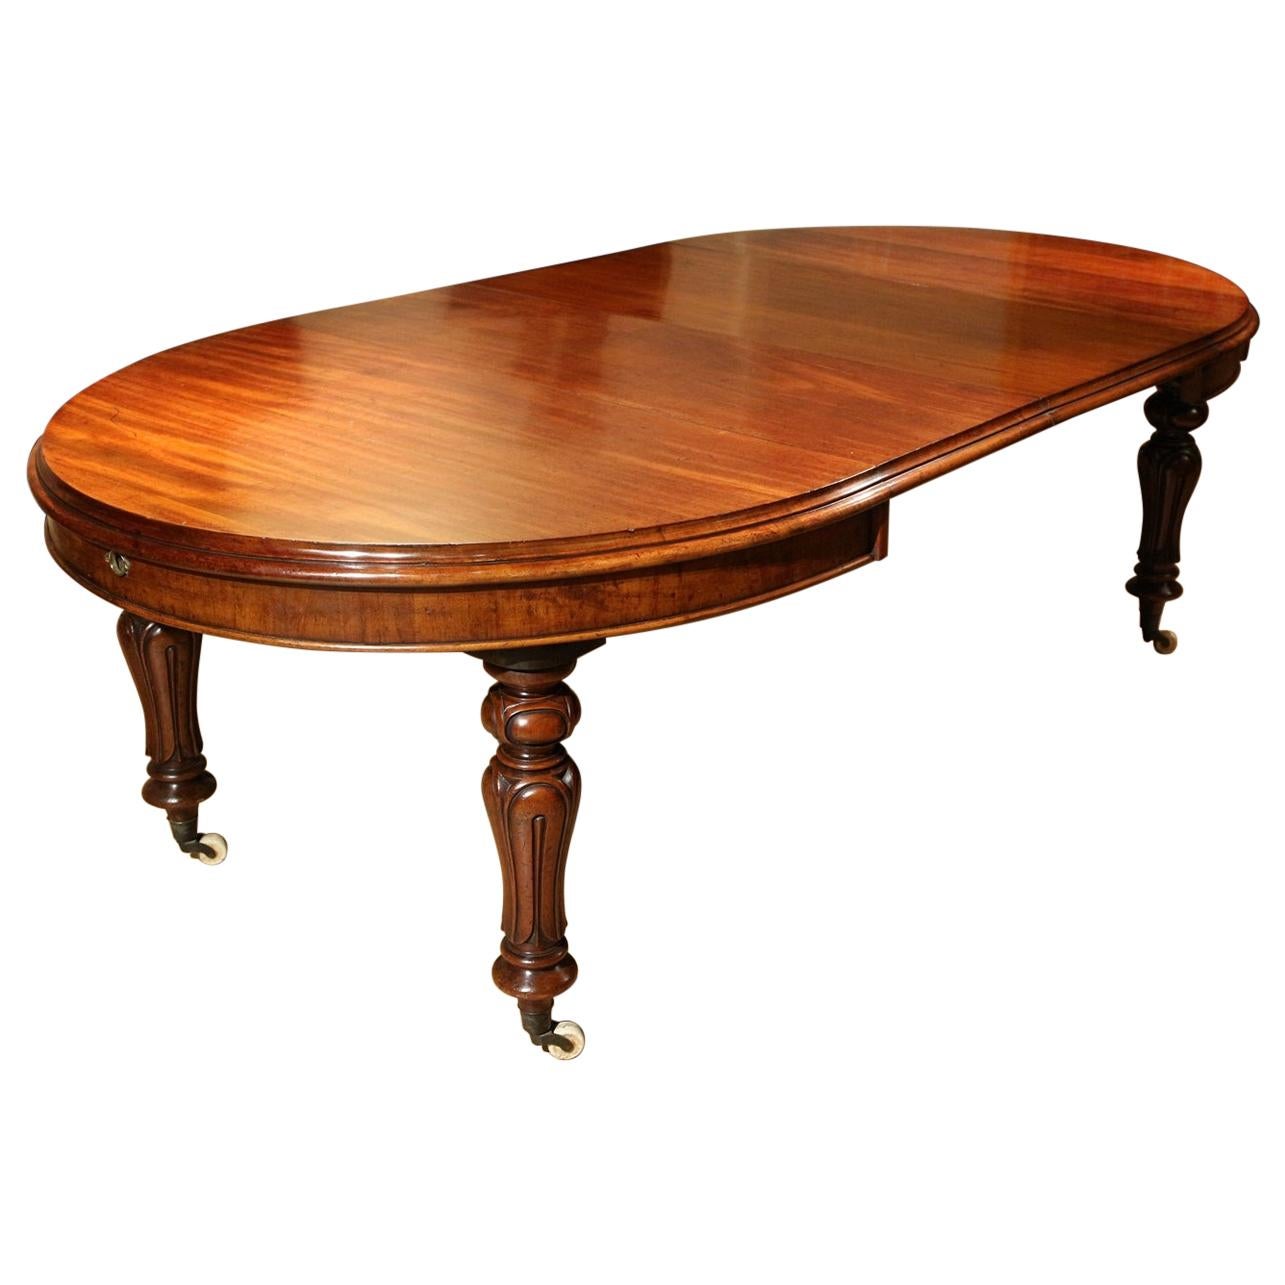 Beautiful antique mahogany oval dining room table with 2 extra leaves. The table is from the Victorian era circa 1840 and is entirely of solid mahogany. The table is on porcelain wheels. Table is in perfect and completely original condition.